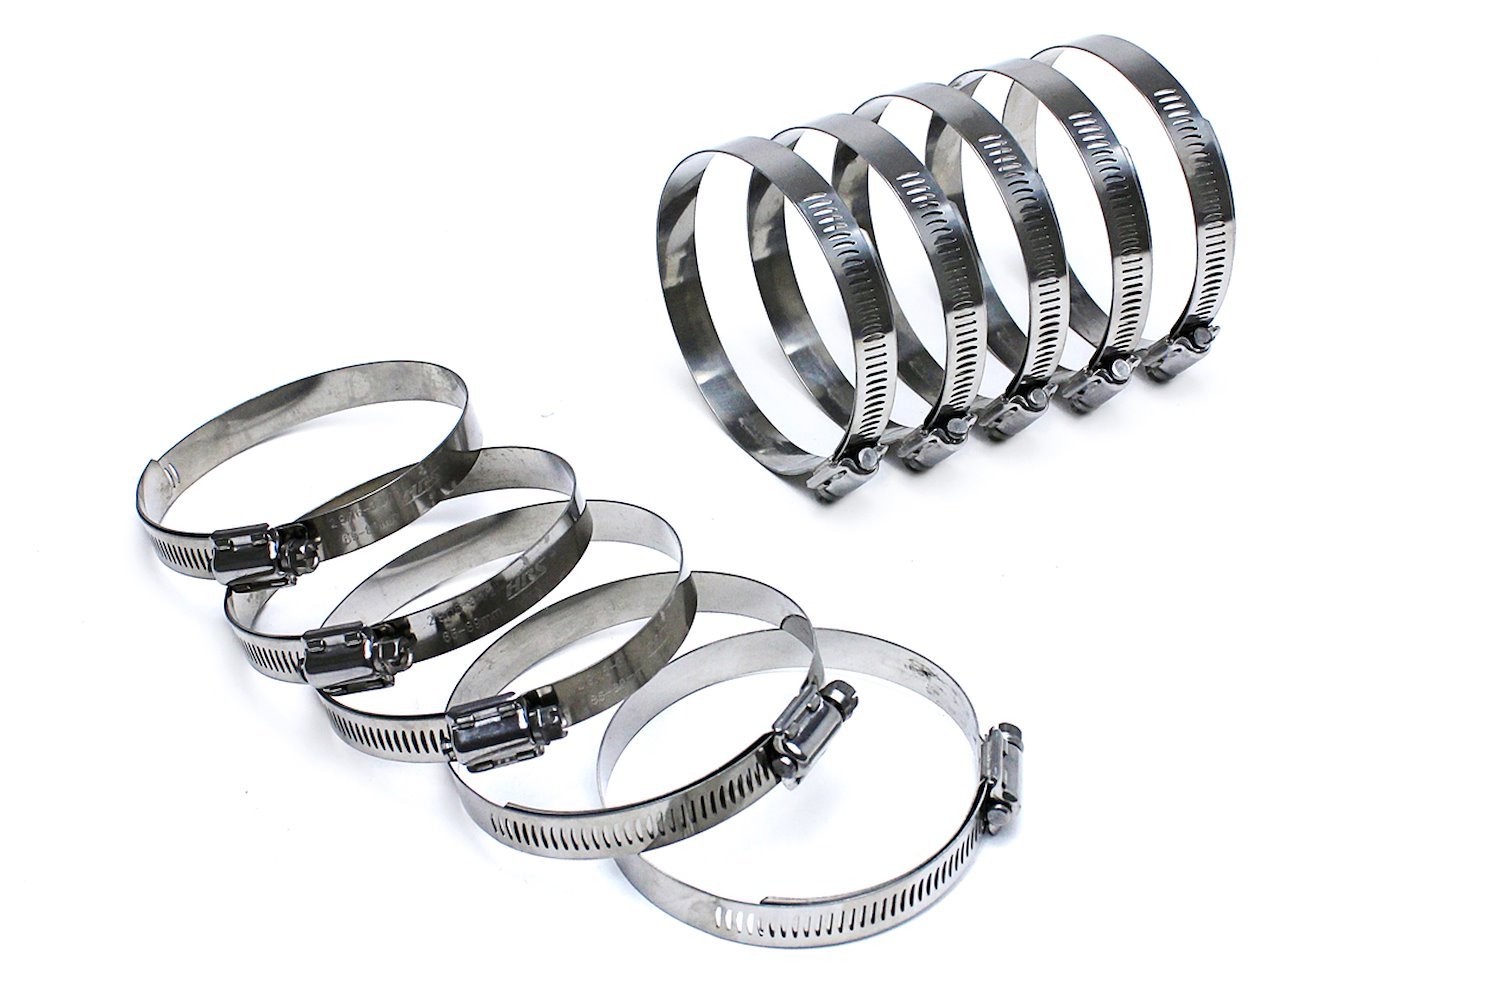 SSWC-105-127x10 Stainless Steel Worm Gear Hose Clamp, Effective Range: 4-1/8 in.- 5 in., 10Pc